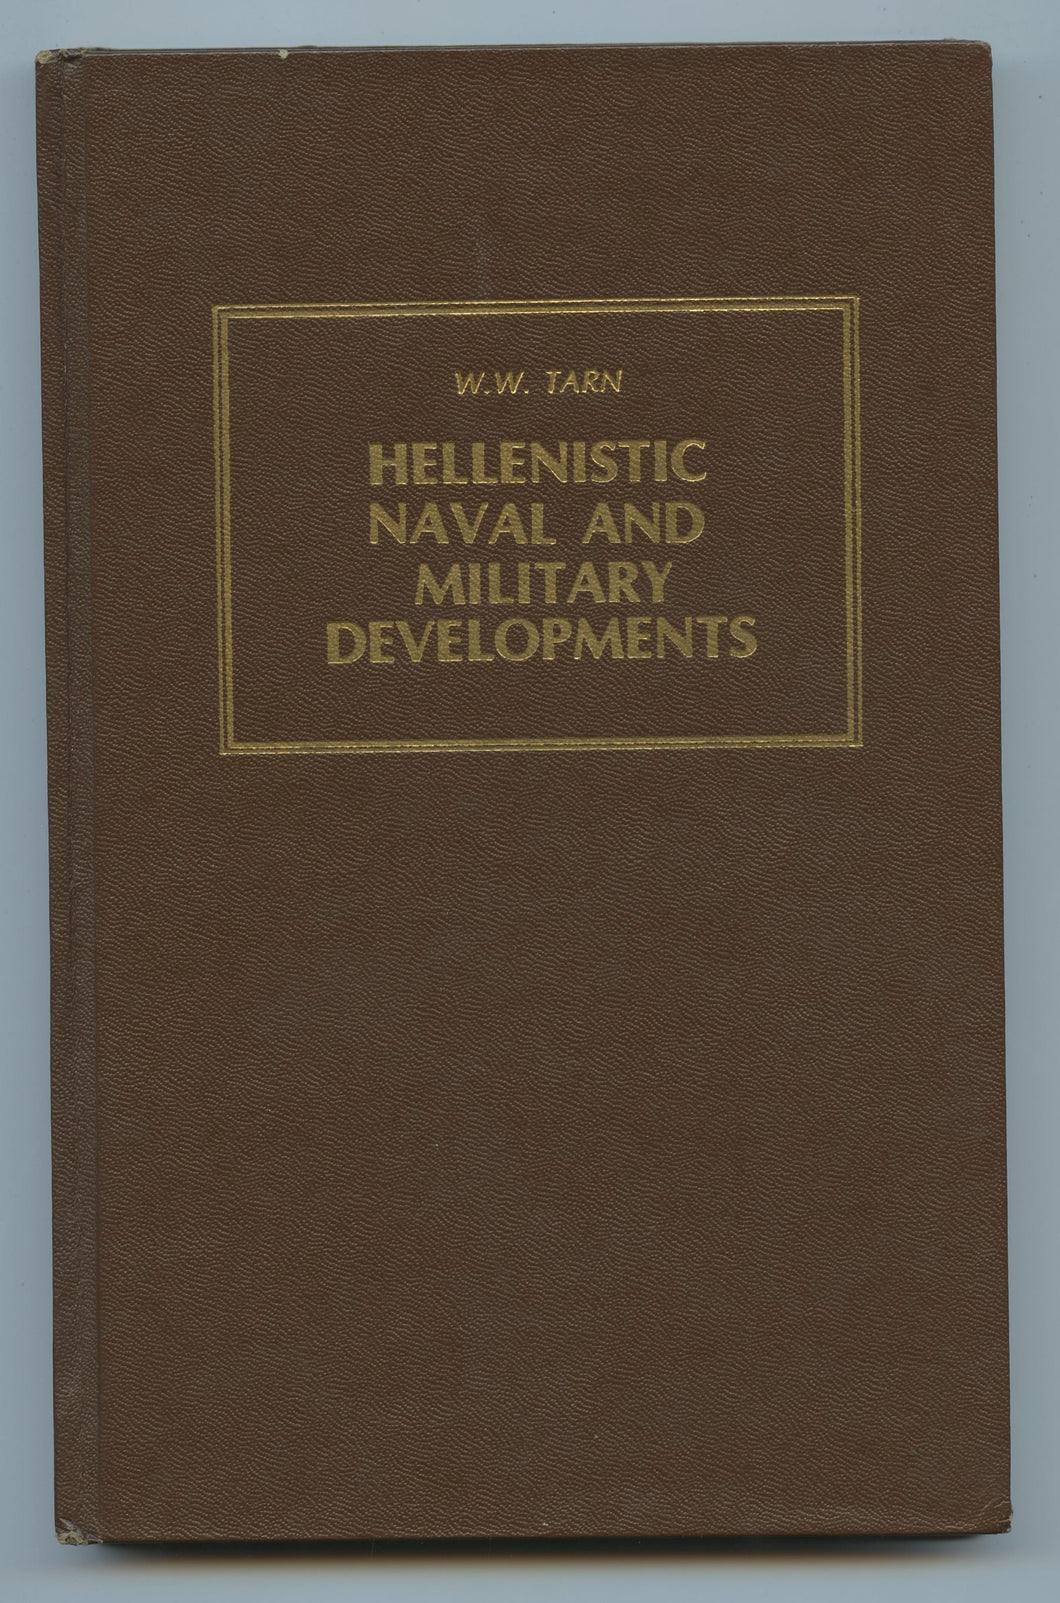 Hellenistic Naval and Military Developments